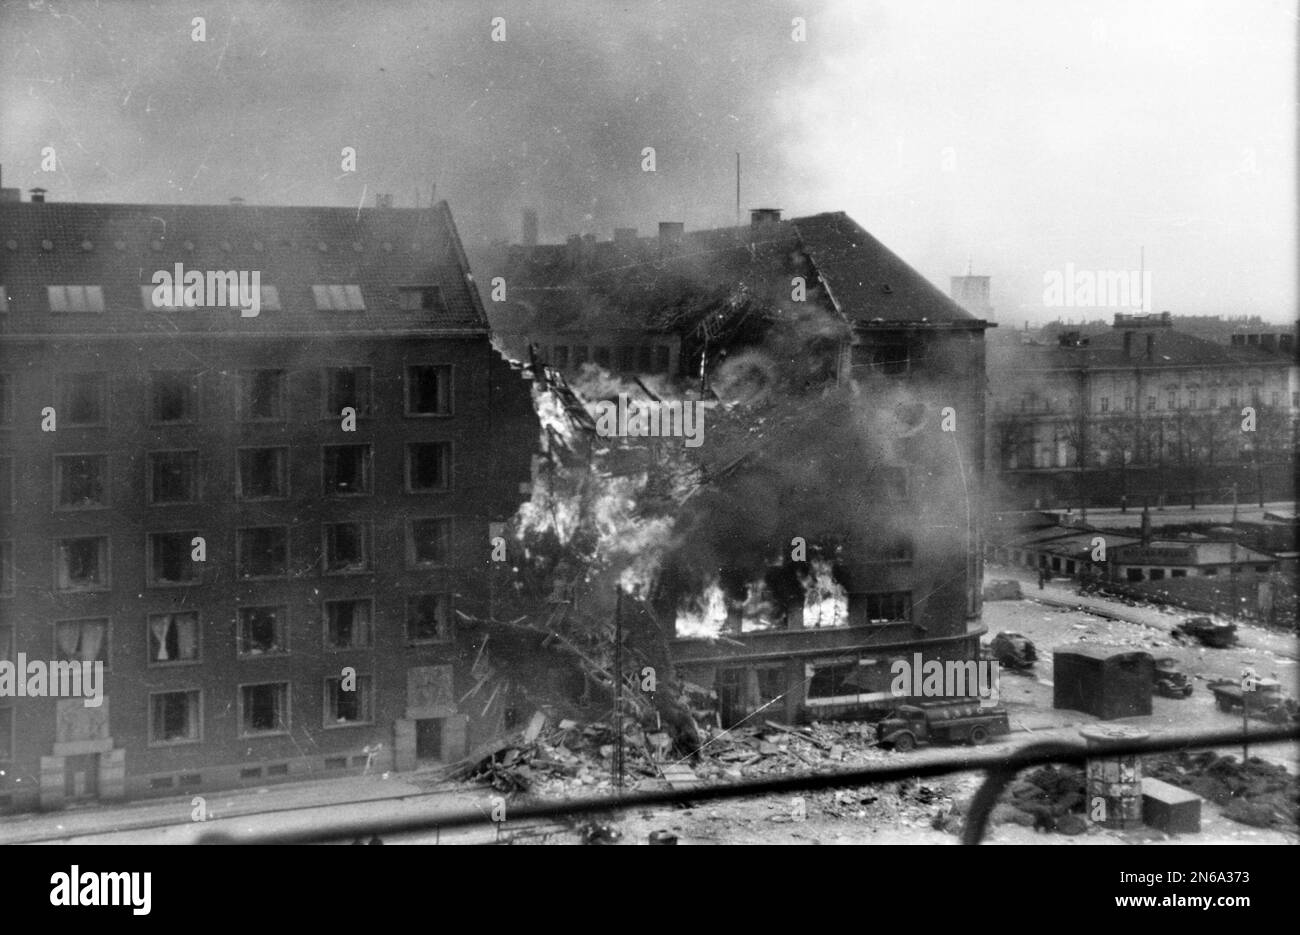 Operation Carthage was a low level precisionbombing attack on the Shellhus (Shellhouse) in Copenhagen. The building was the local headquarters of the Nazi state's secret police the Gestapo. Sadly some pilots mistook a nearby school (the Institut Jean d'Arc) for the Shellhus and bombed it, which reulted in 125 deaths. This is the Shellhus burning after the bombing raid Stock Photo